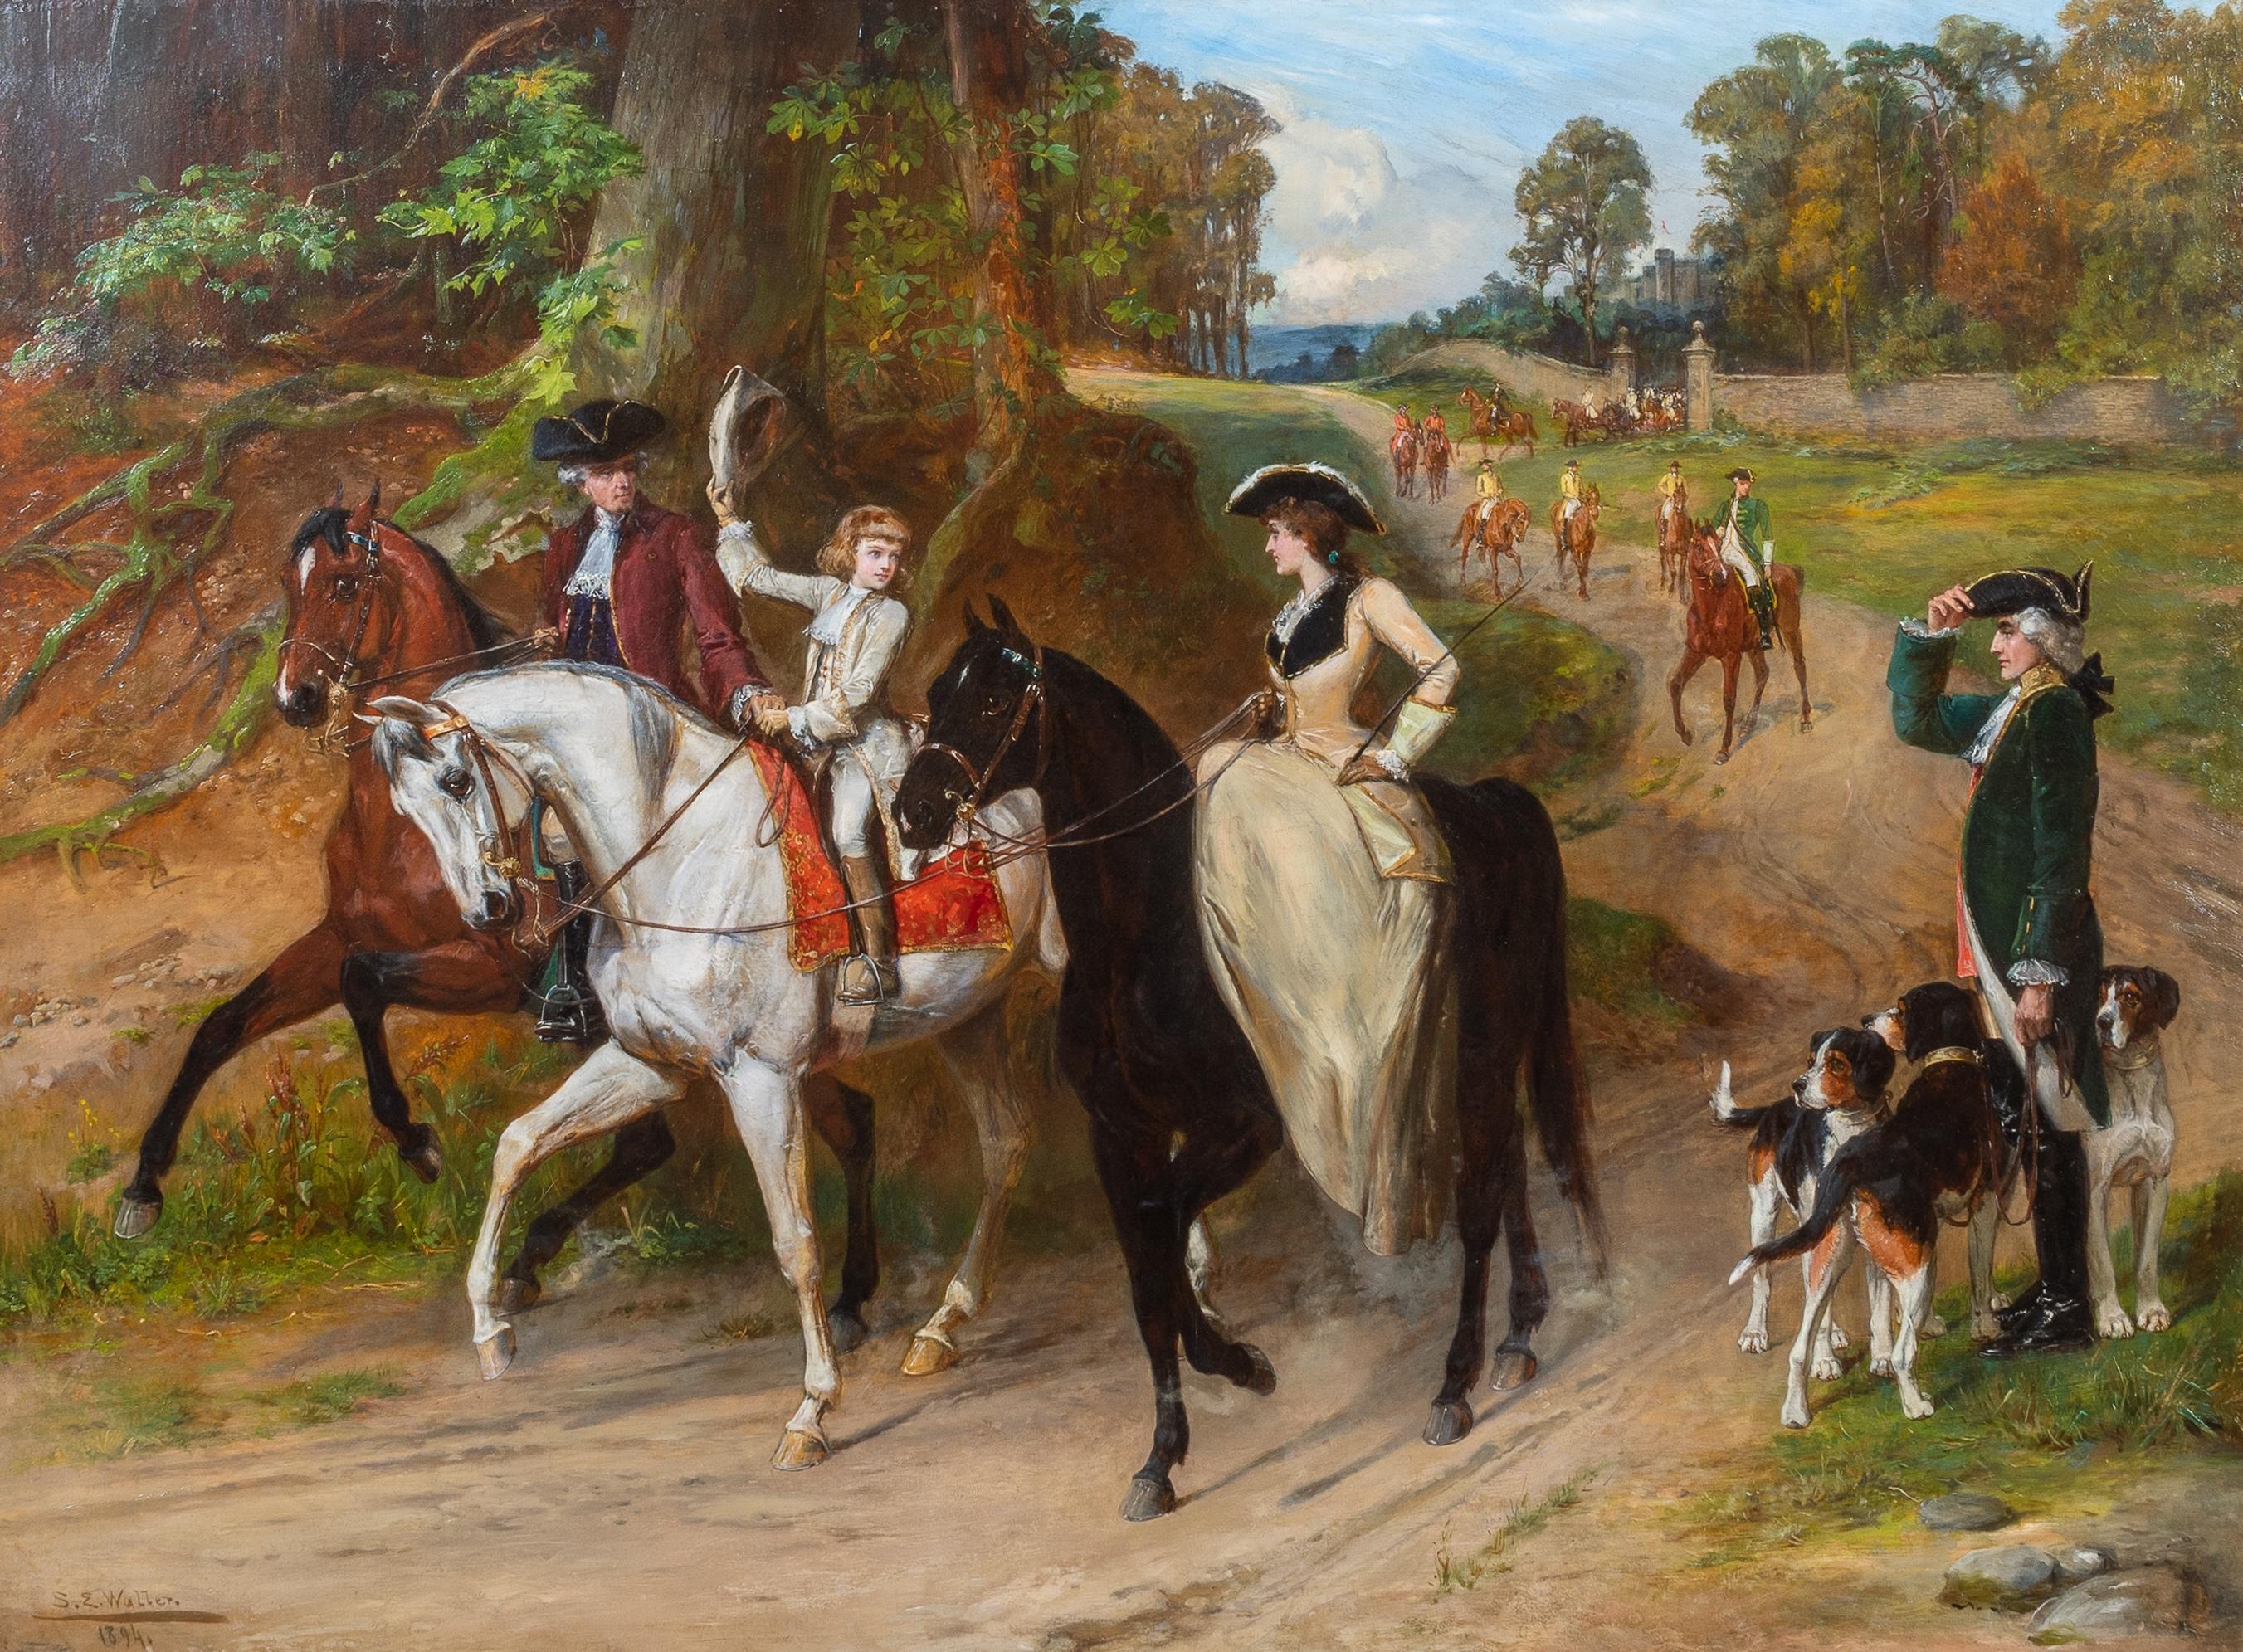 'A Gallant Salute' Figurative 19th Century painting of royalty, horses & hounds - Painting by Samuel Edmond Waller